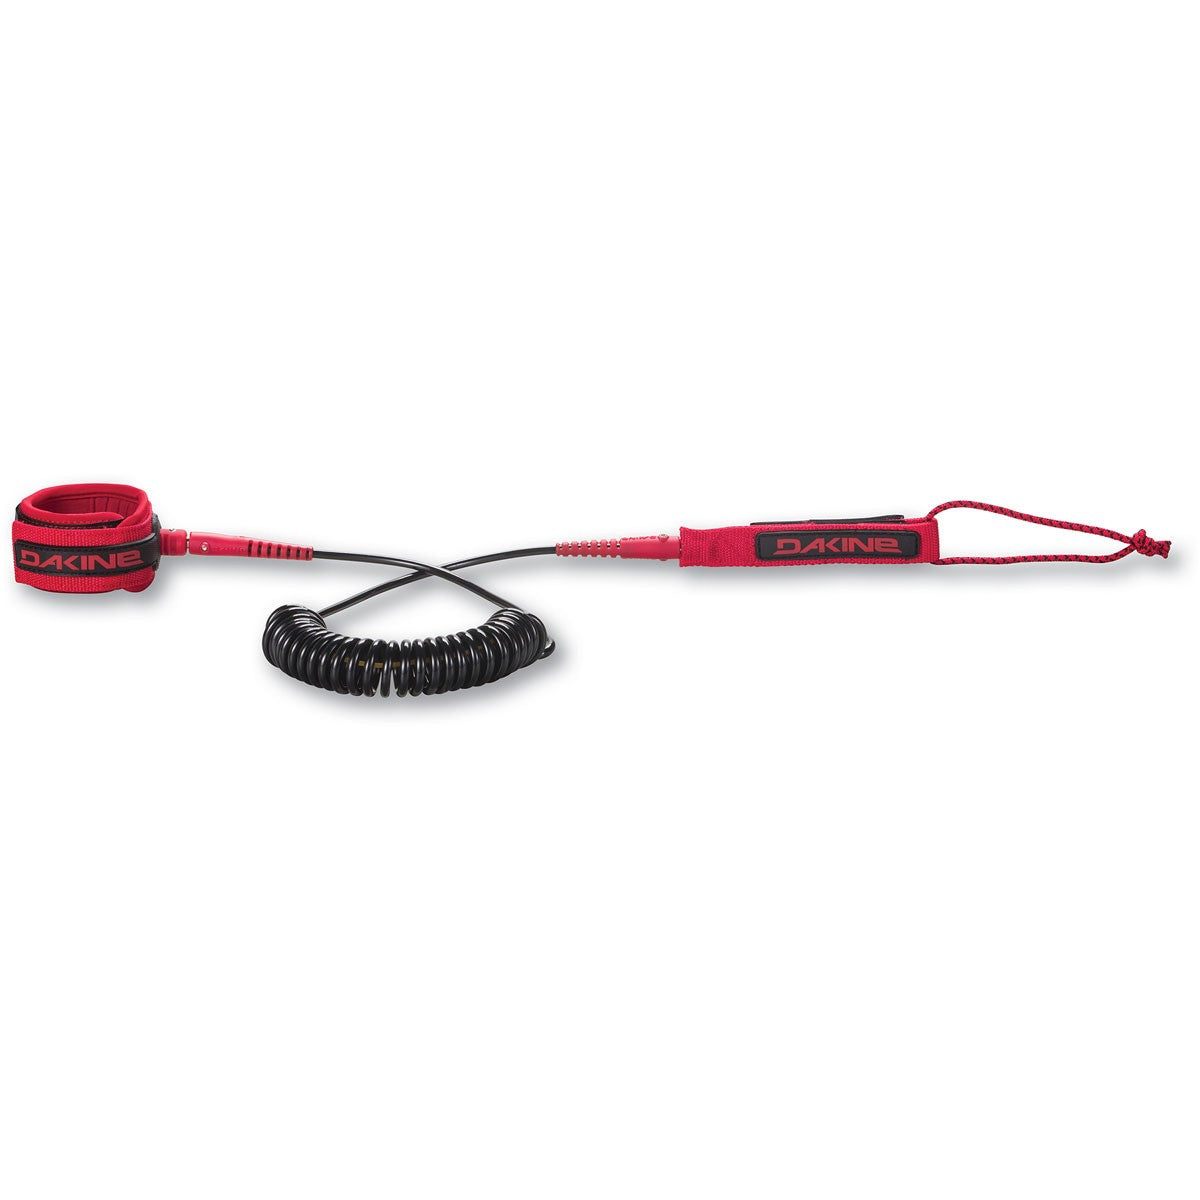 Dakine Coiled Ankle SUP Leash RacingRed 10ft0in x 1/4in